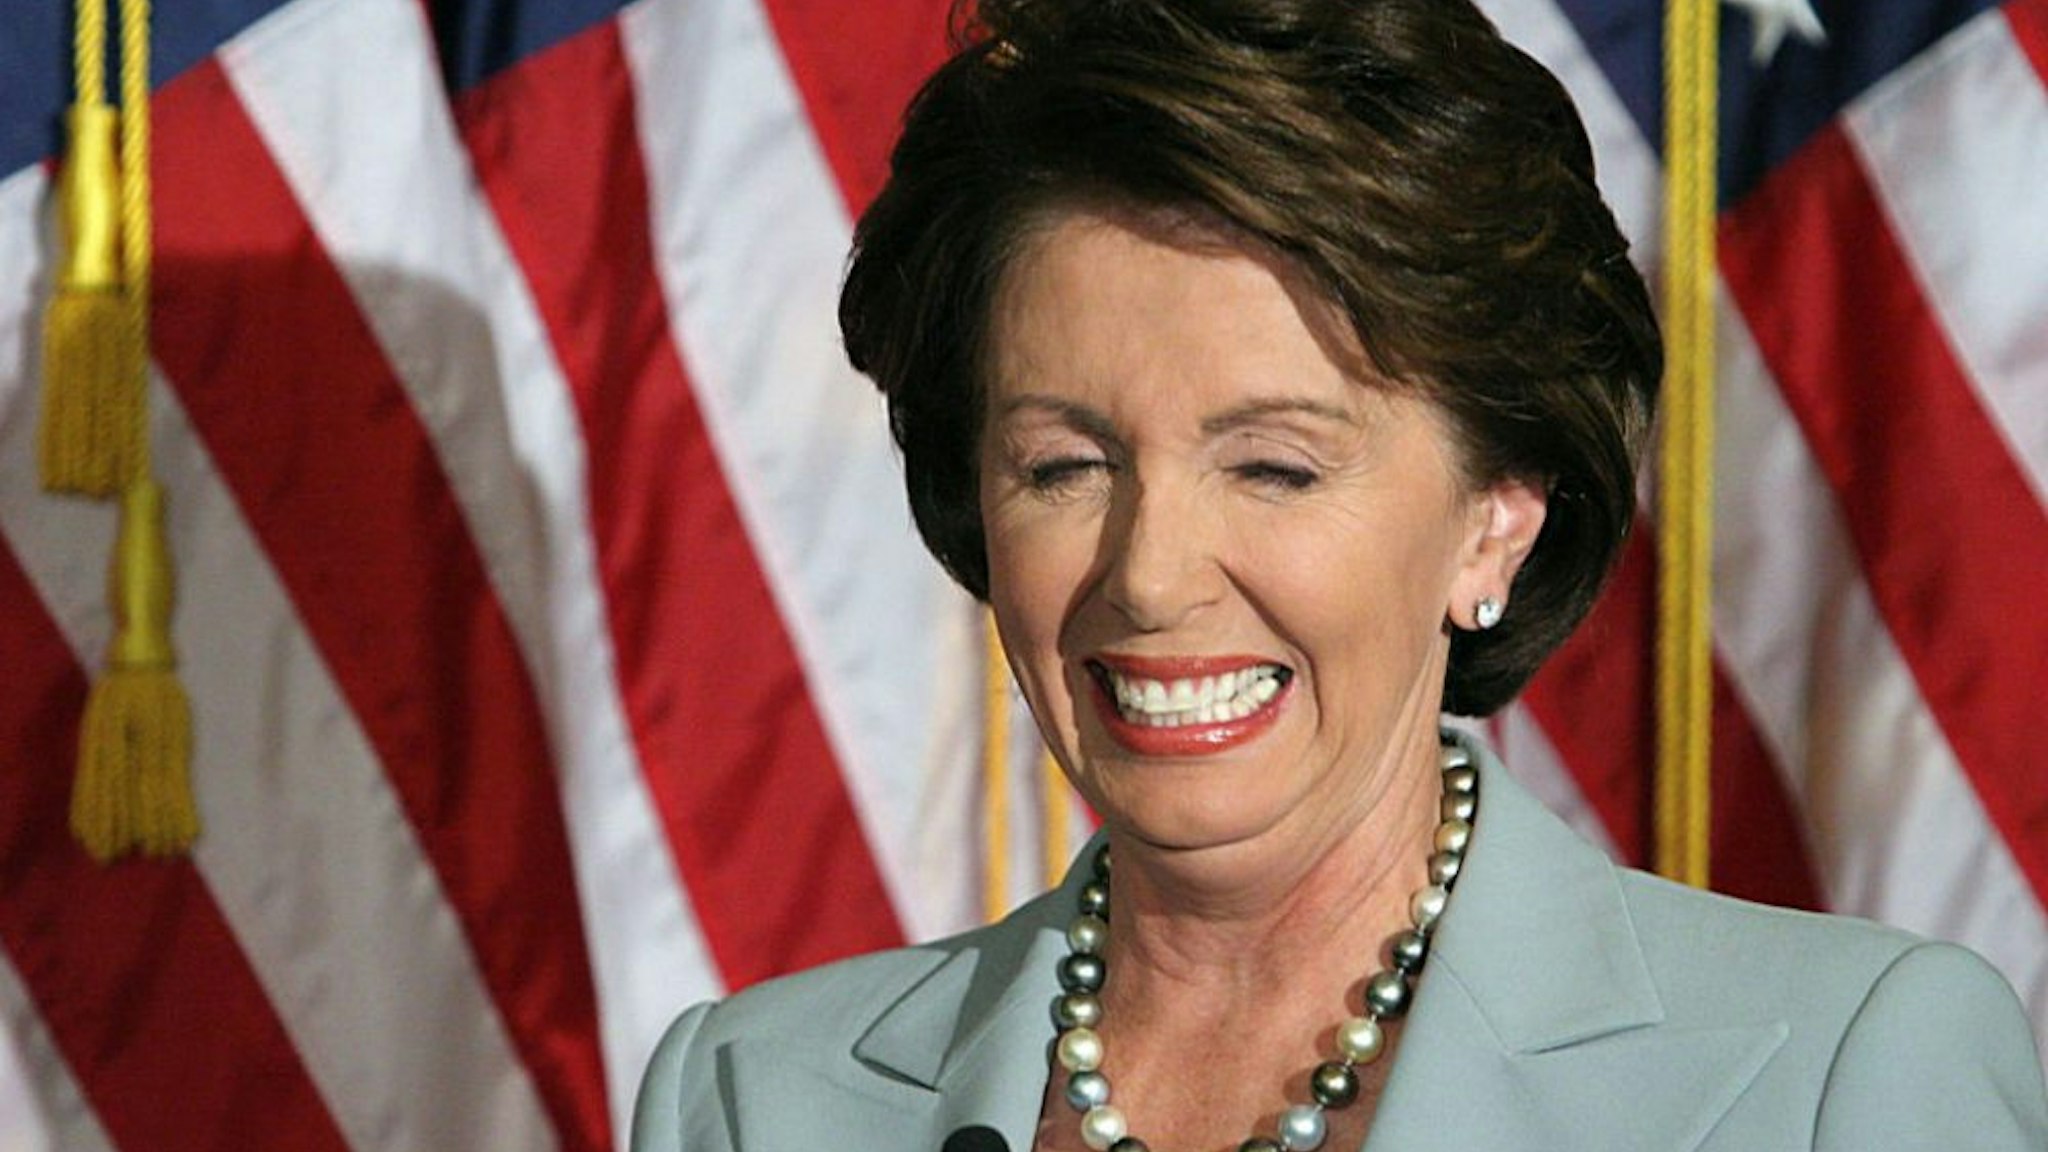 Democratic House leader Nancy Pelosi laughs at a question during a press conference 08 November 2006 on Capitol Hill in Washington, DC. Pelosi is set to become the first female speaker of the US House of Representatives following the 07 November elections. She has called for the resignation of US Secretary of Defense Donald Rumsfeld which was announced 08 November by US President George W. Bush.